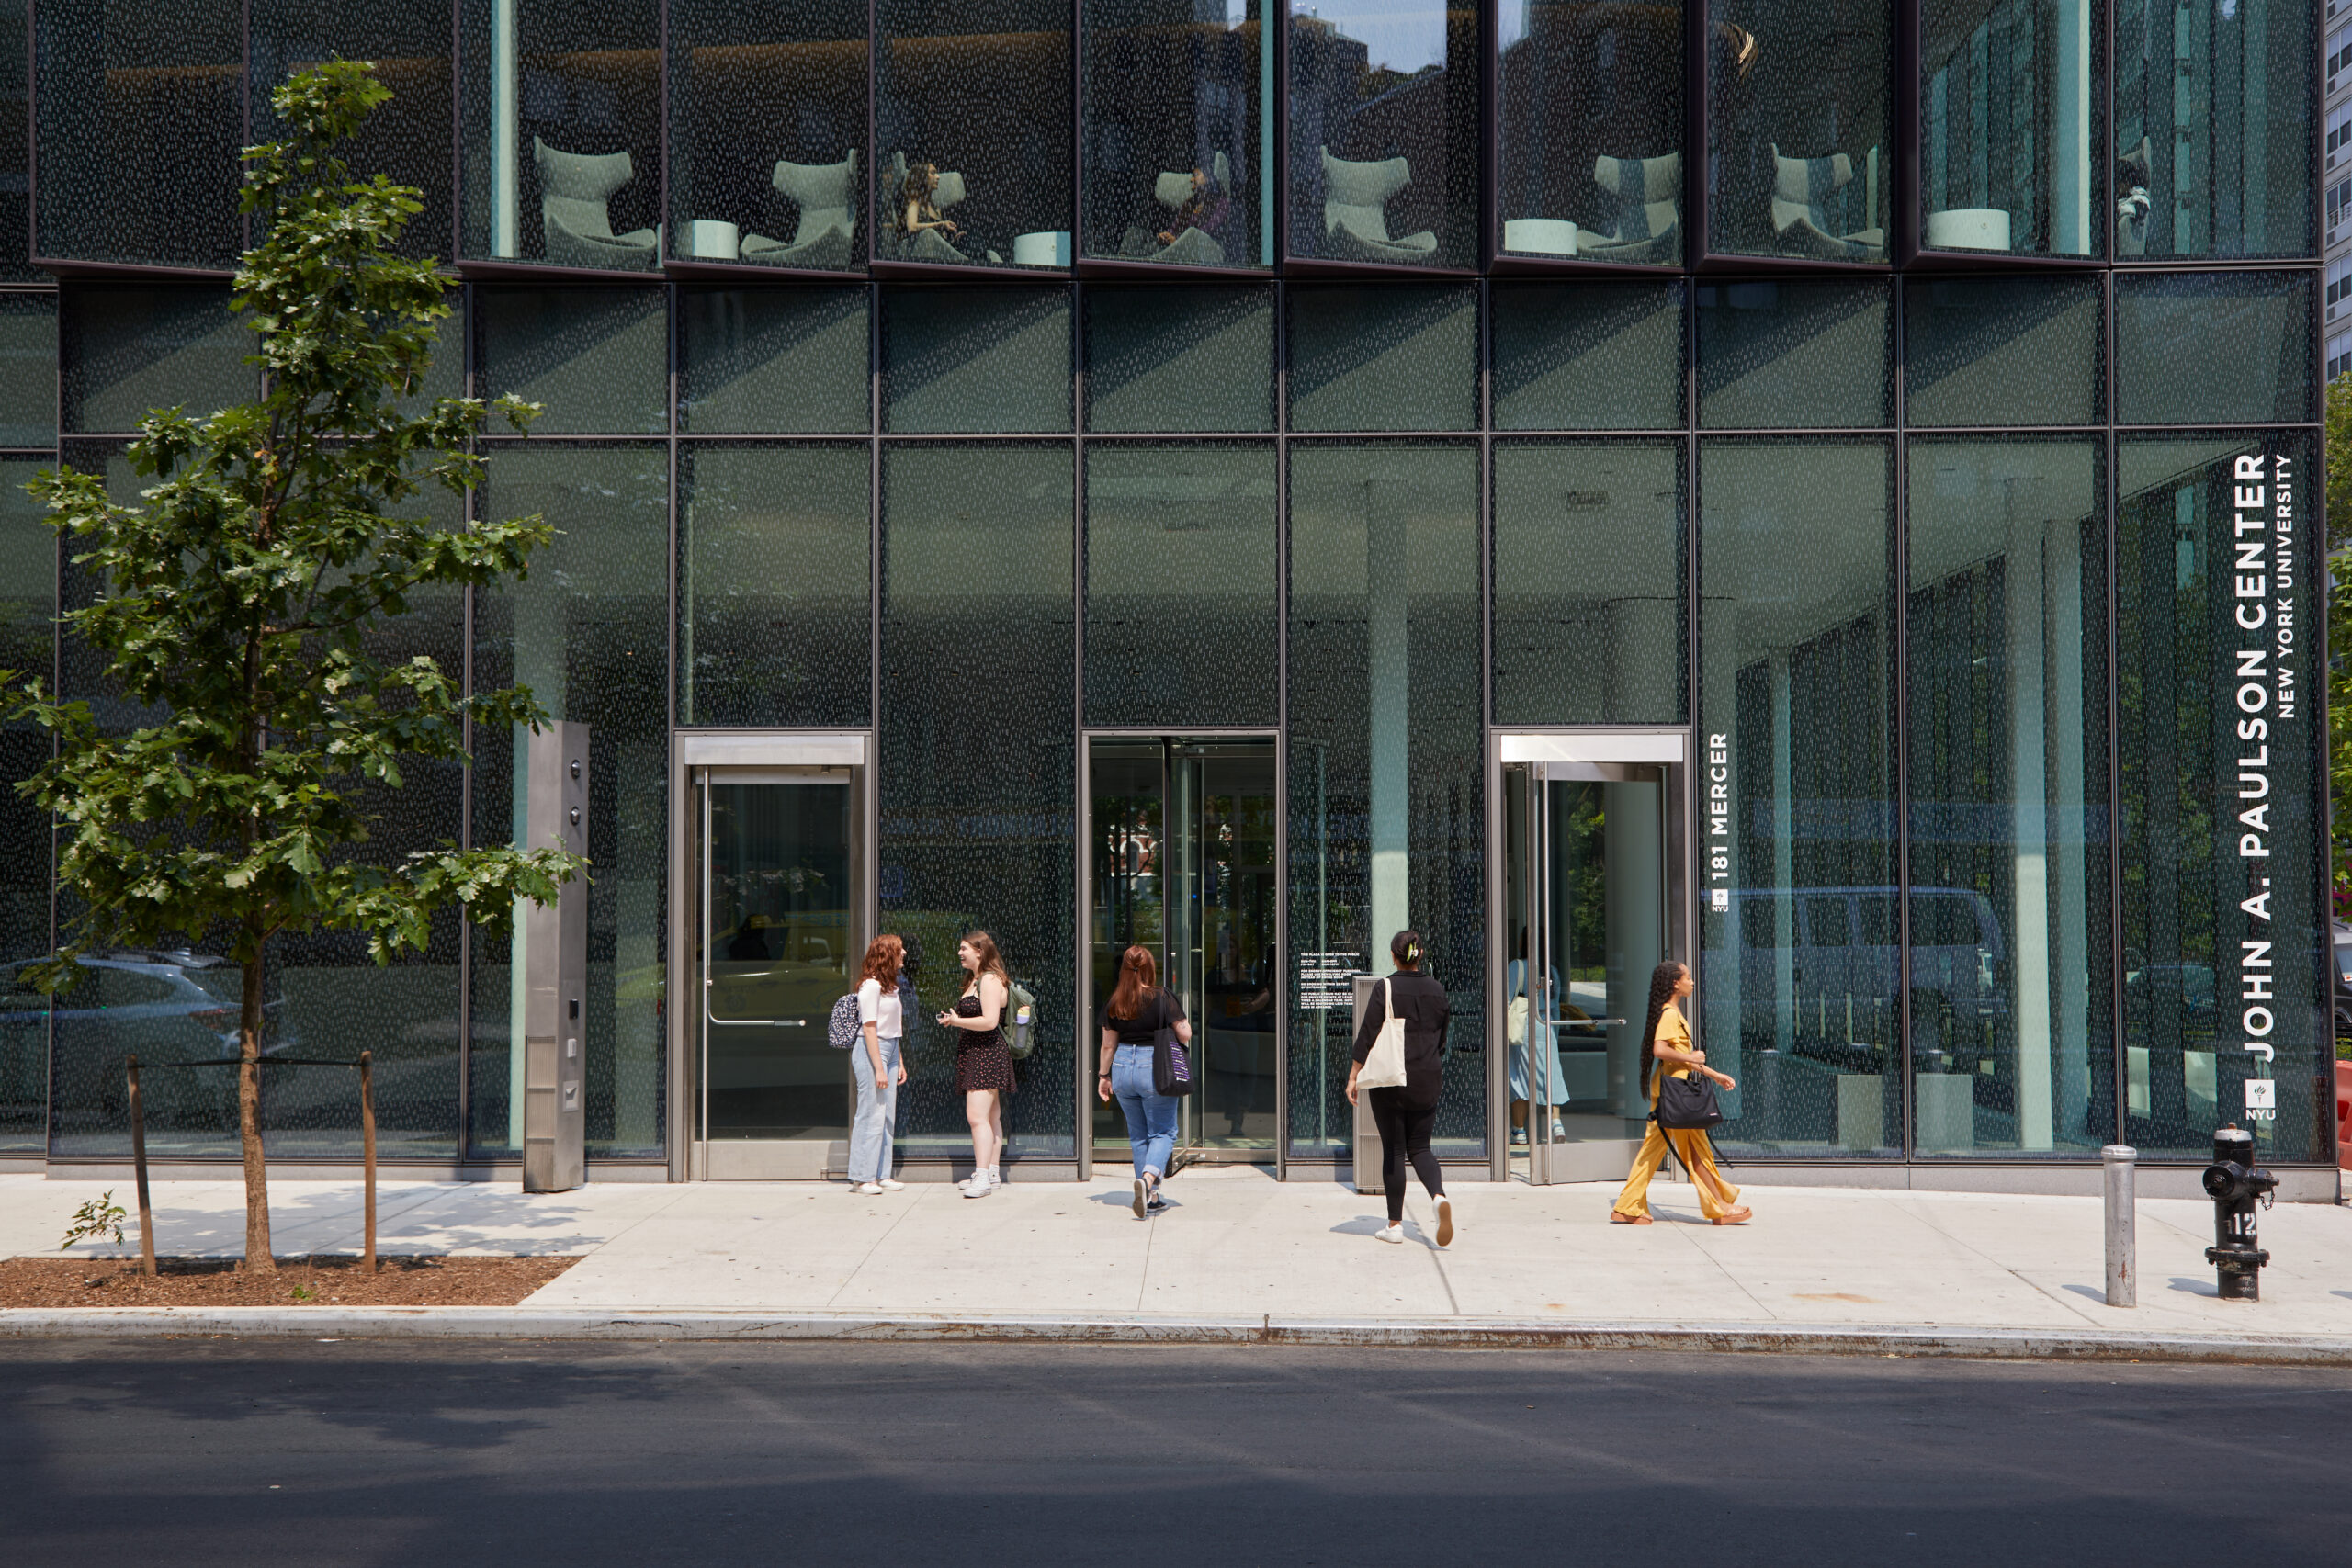 People entering and exiting the John A. Paulson Center on NYU’s campus in New York City. The building has a modern glass facade, and there are a few people standing and chatting outside the entrance.